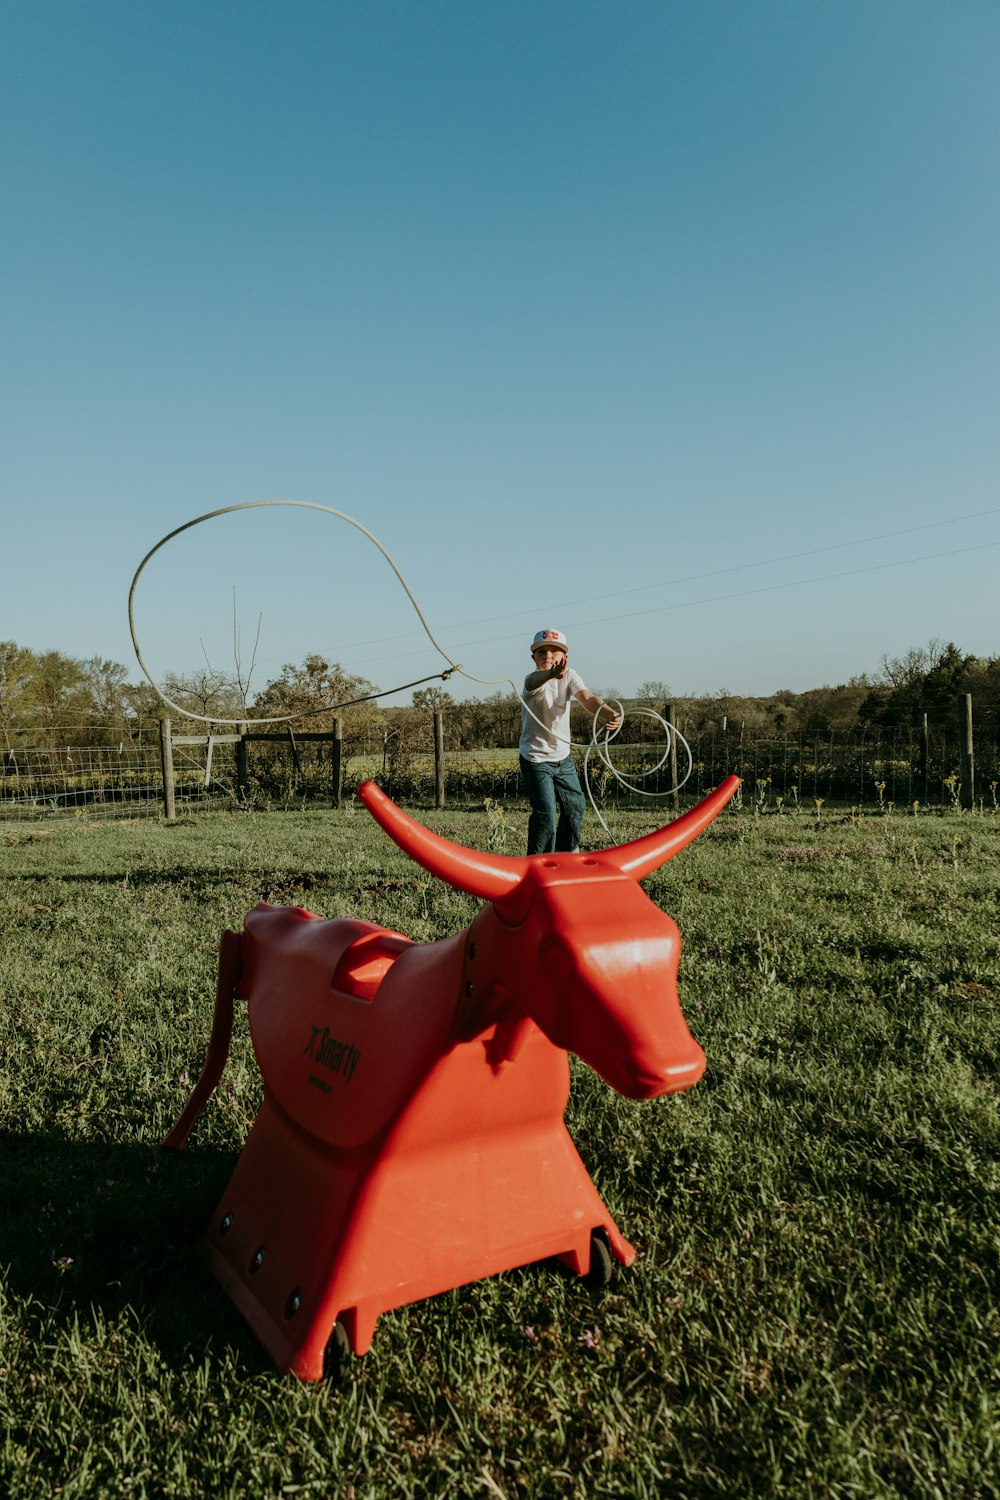 a person standing next to a red lawnmower in a grass field